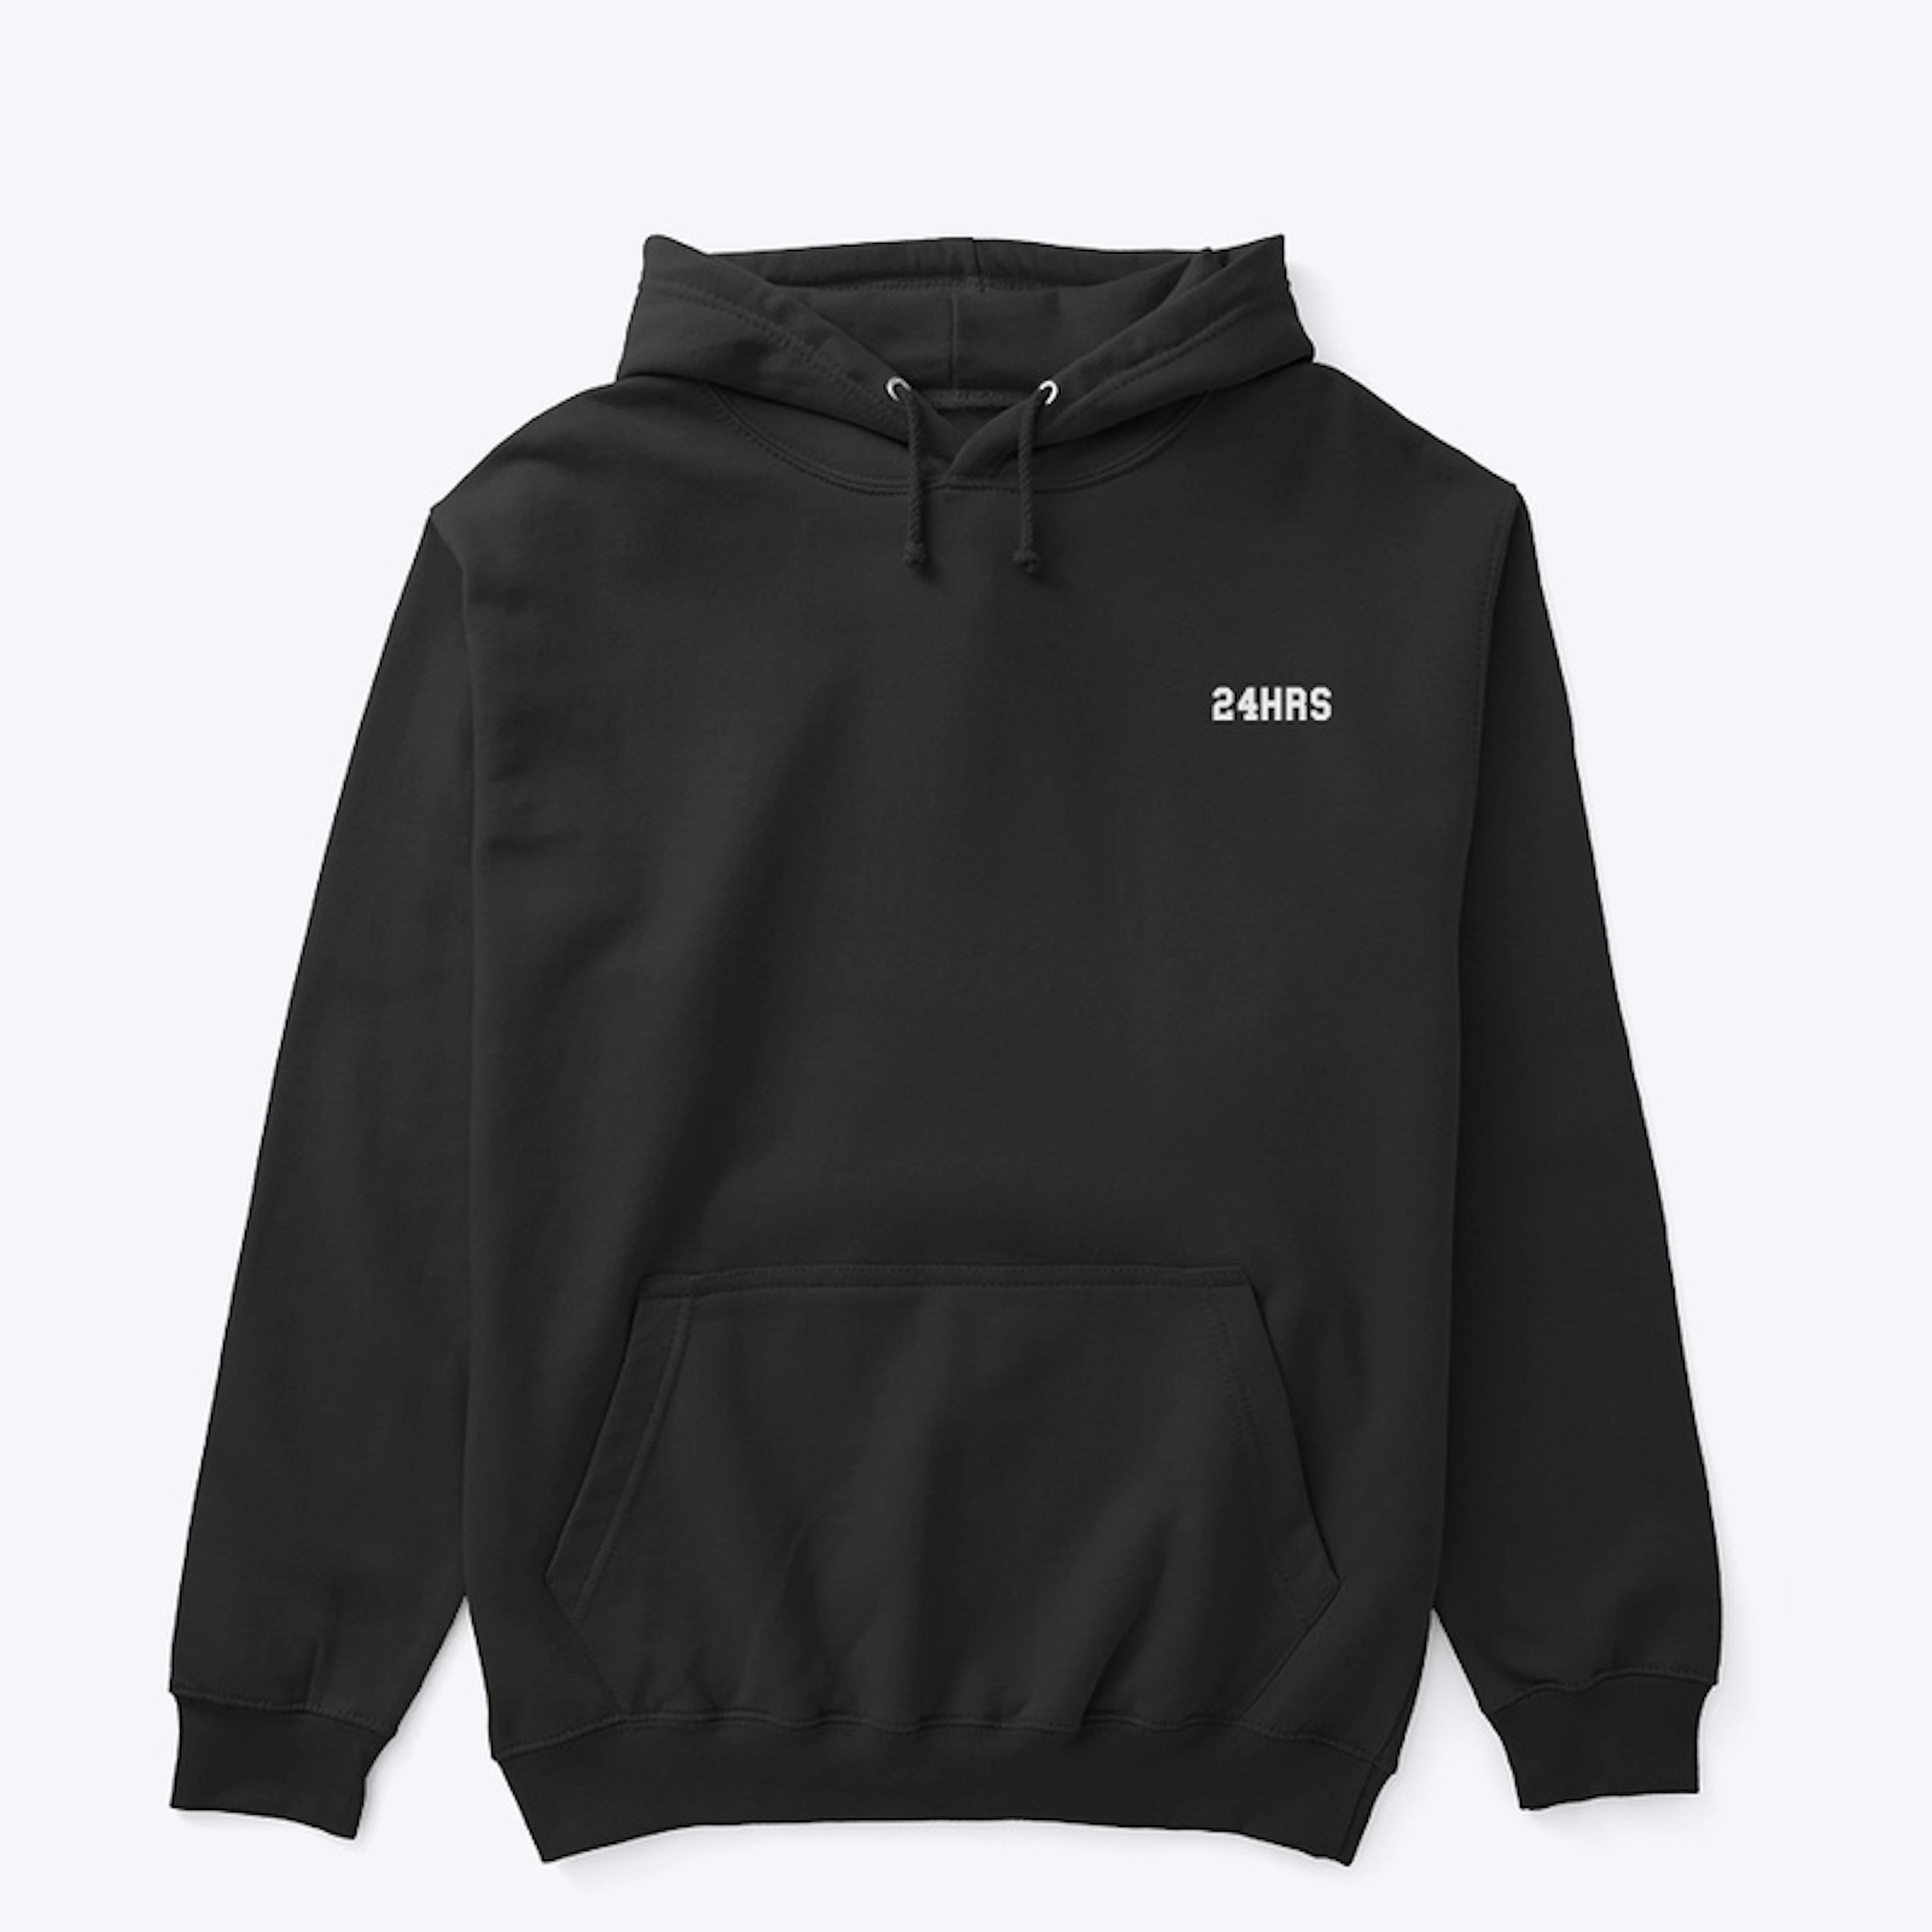 24hrs hoodie be you